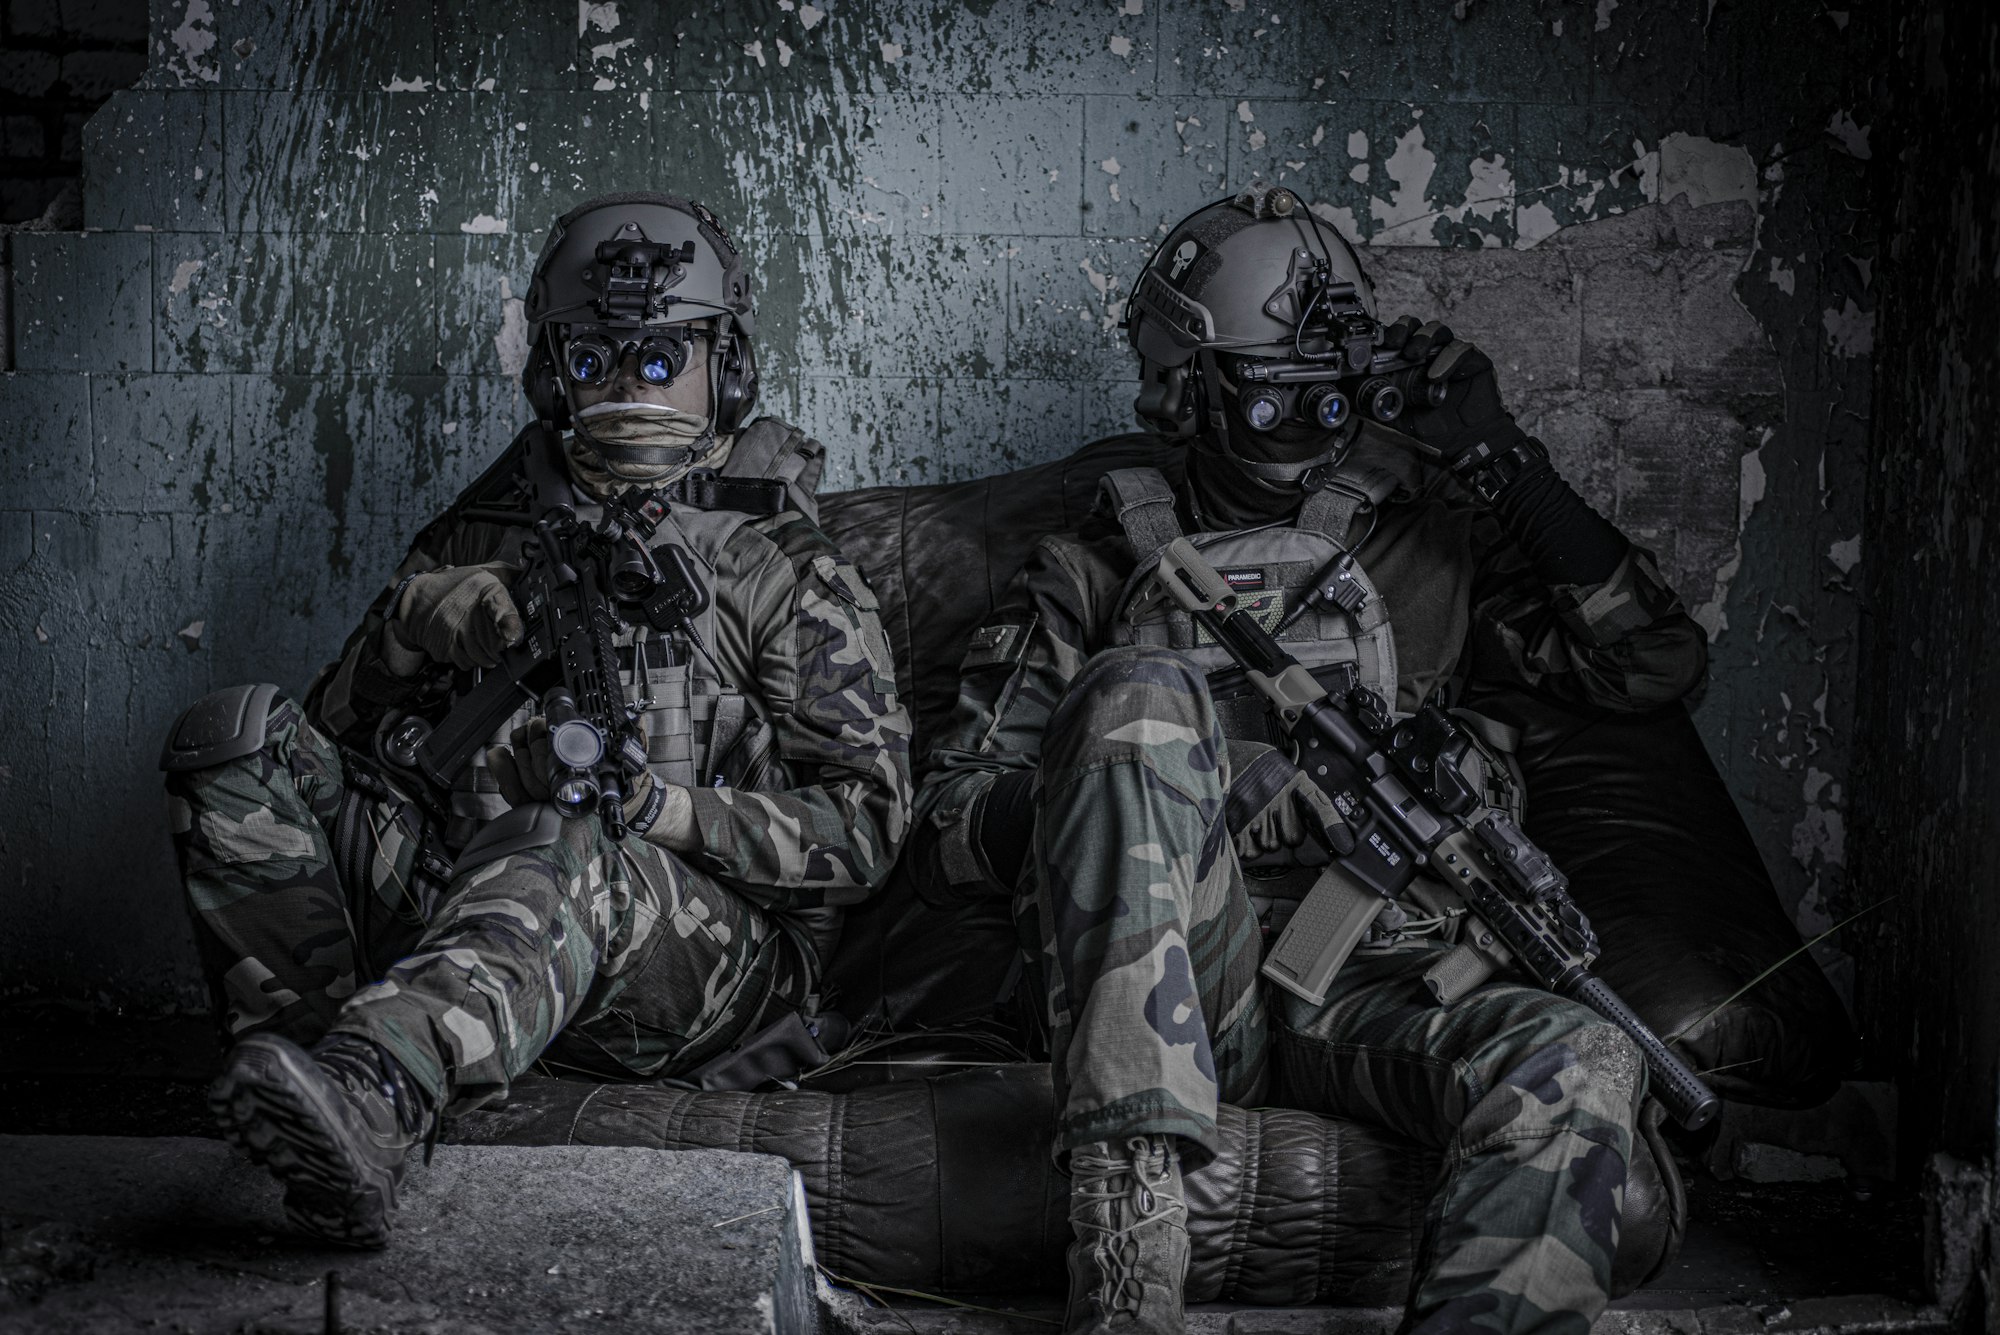 Airsoft players in protective glasses and helmet, with the airsoftgun